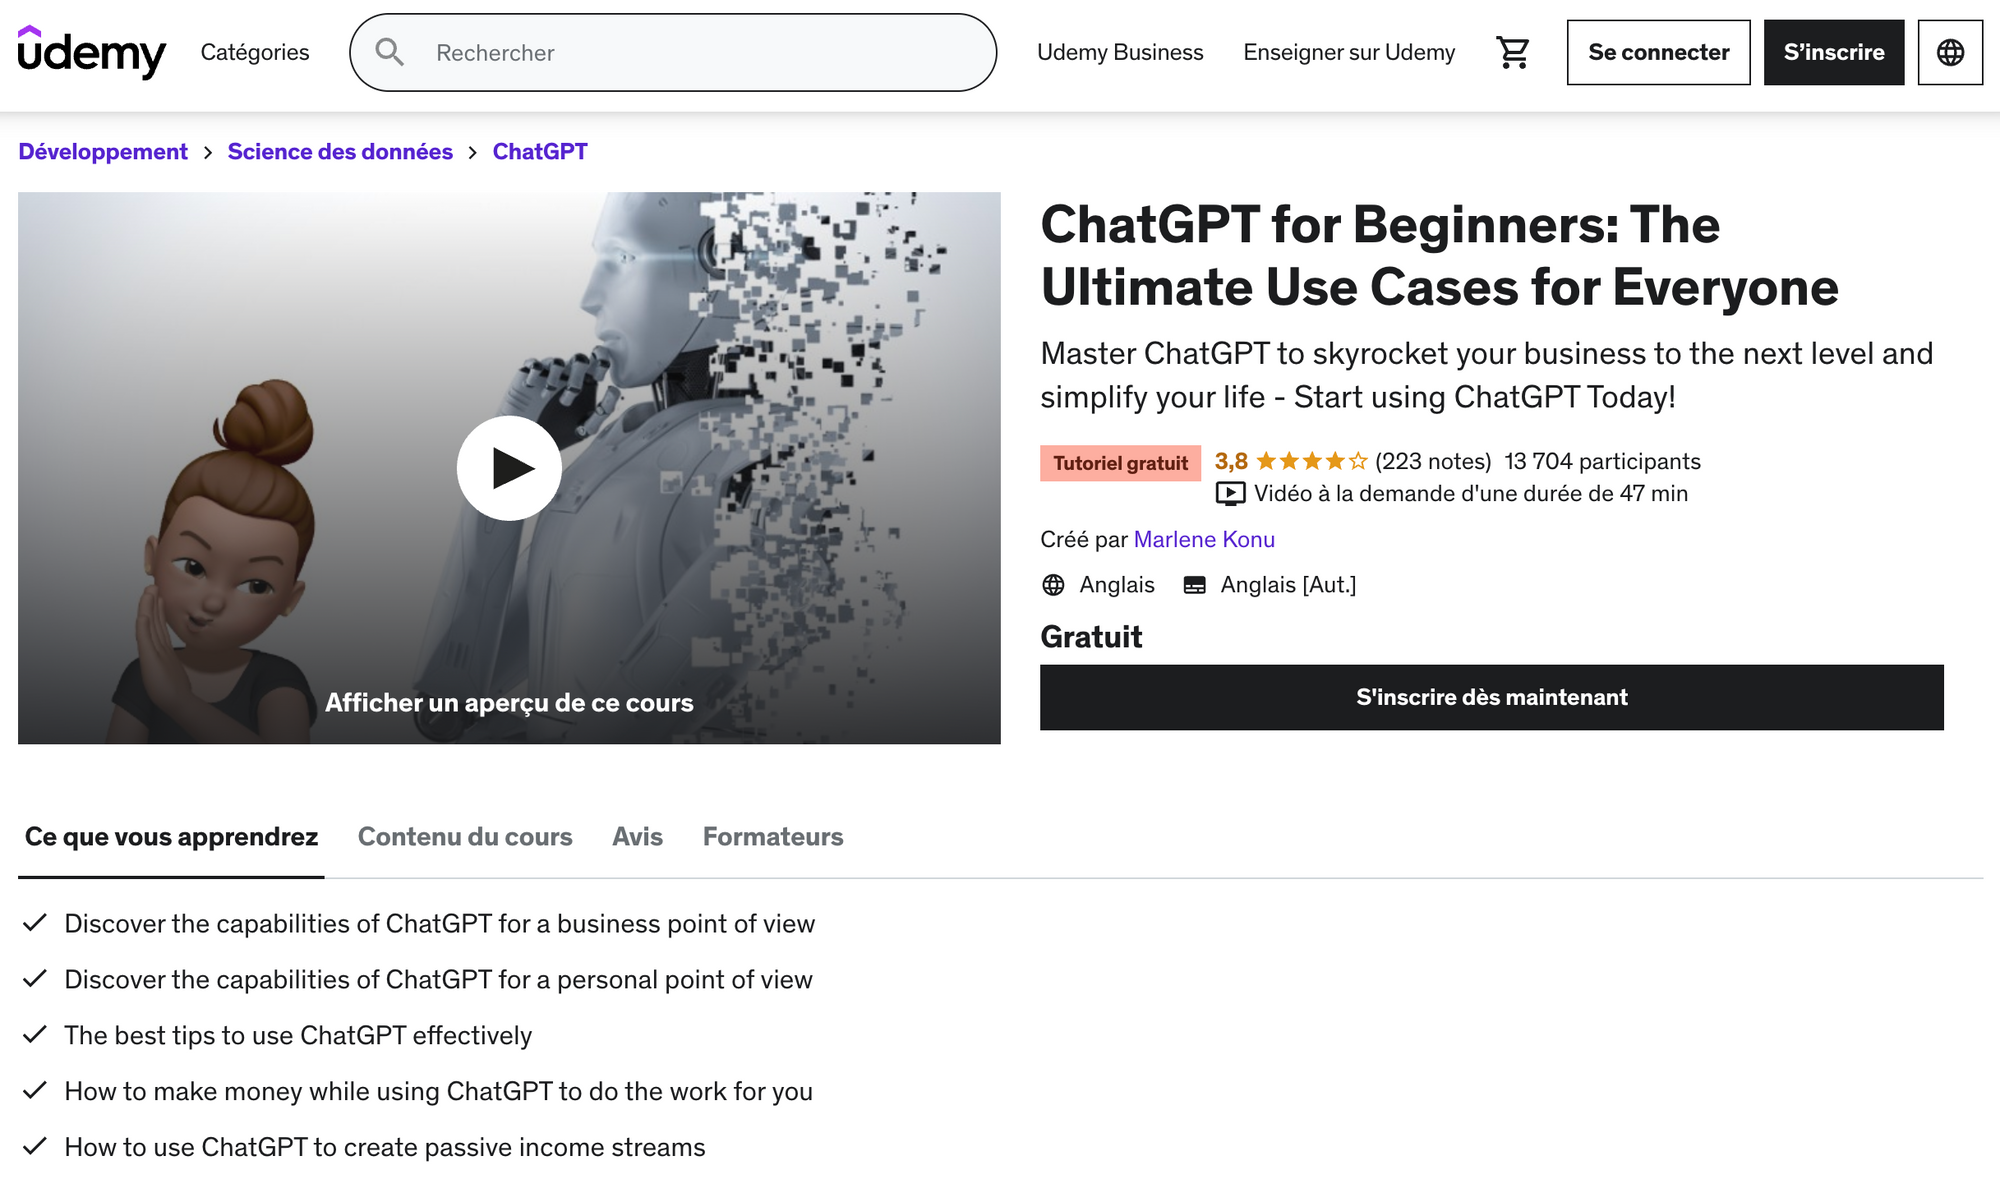 ChatGPT for Beginners: The Ultimate Use Cases for Everyone